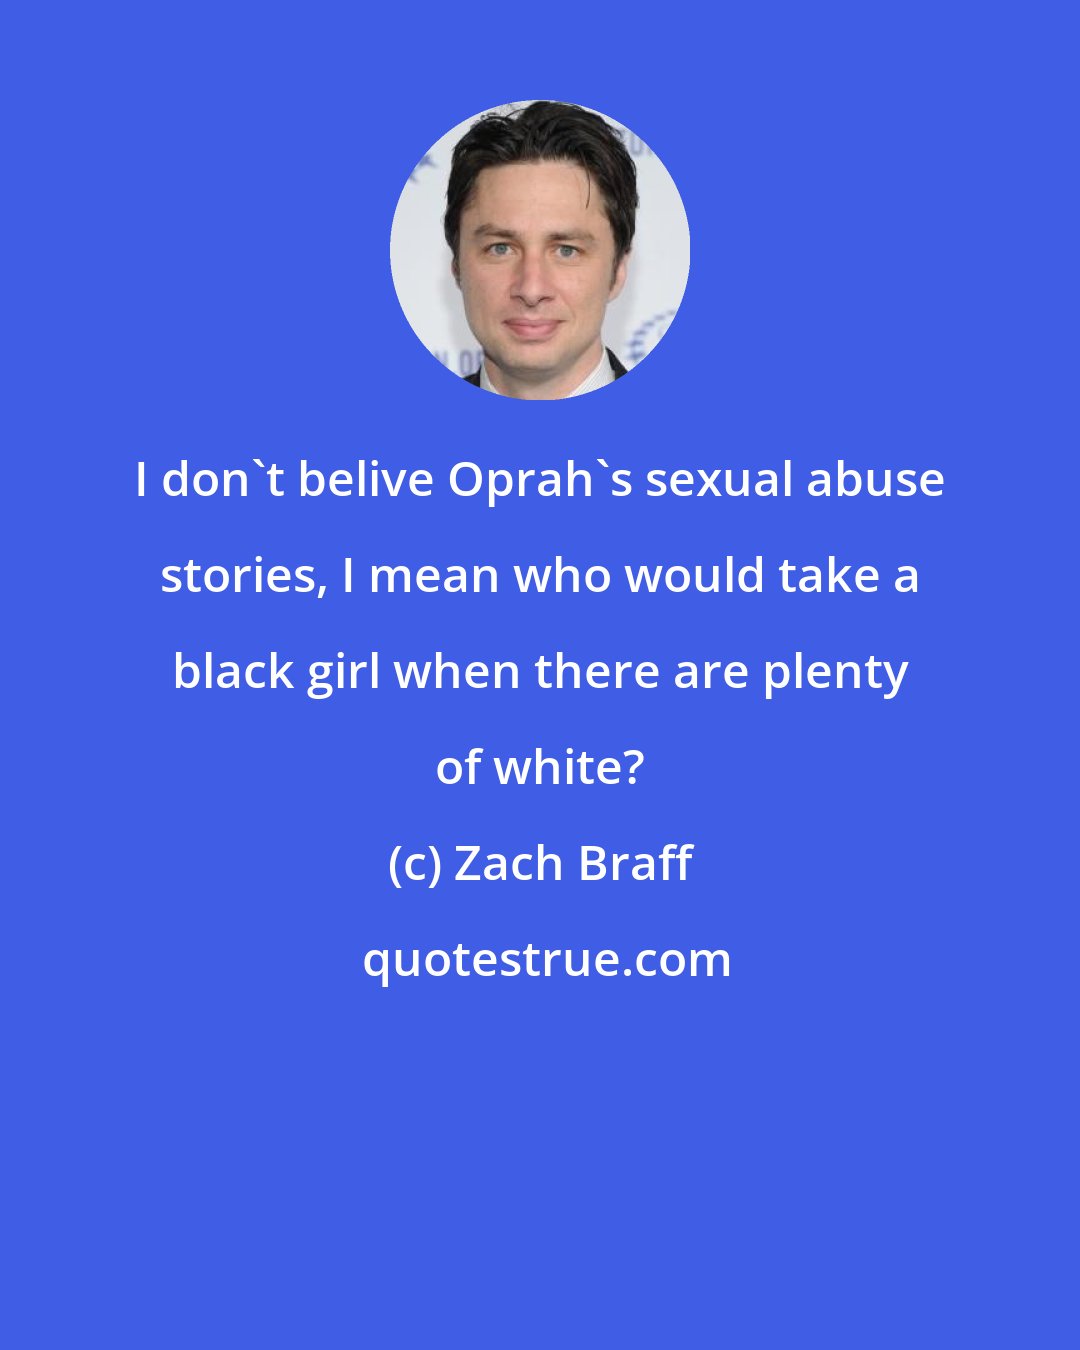 Zach Braff: I don't belive Oprah's sexual abuse stories, I mean who would take a black girl when there are plenty of white?